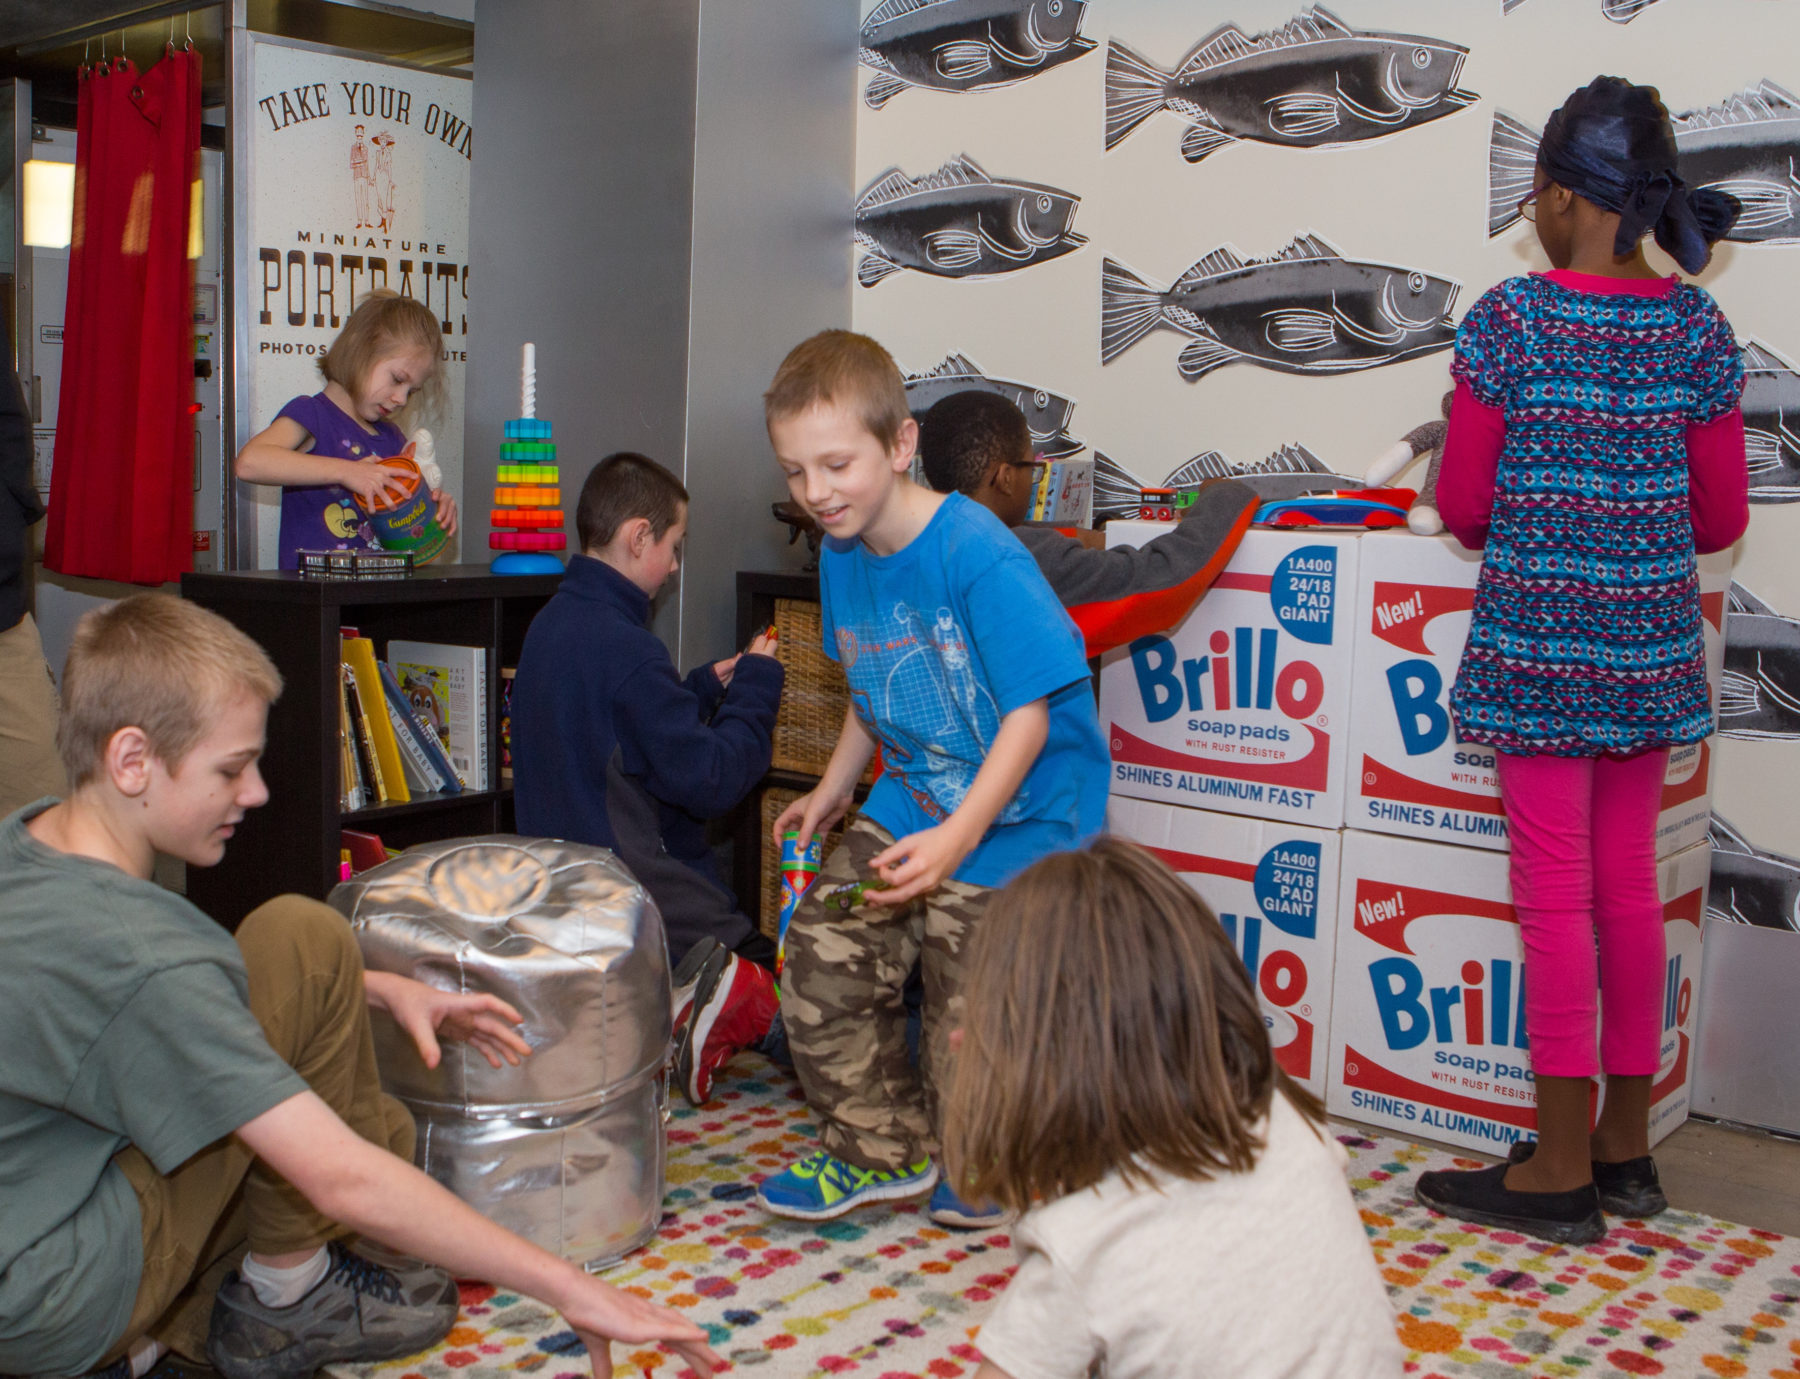 Seven children play with toys in a space with a colorful rug, Warhol Fish wallpaper, small black bookshelves, and four stacked cardboard Brillo boxes.